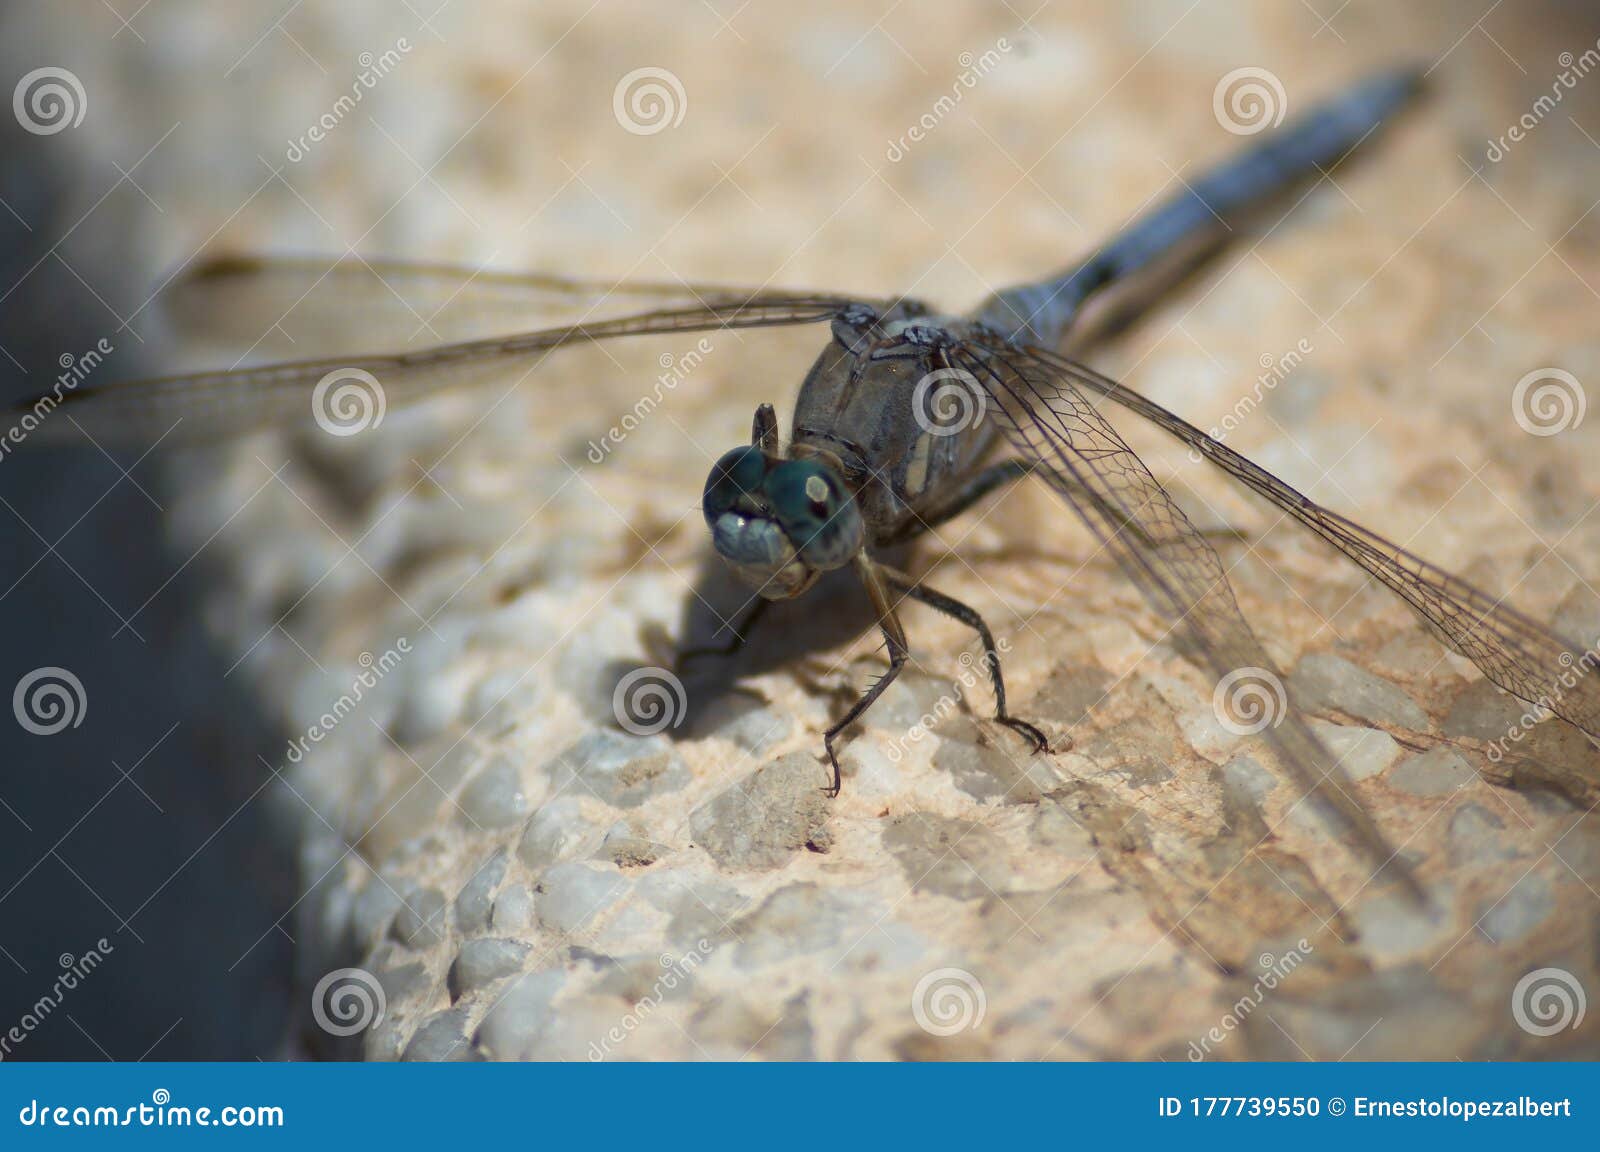 dragonfly perched on the granite in the foreground